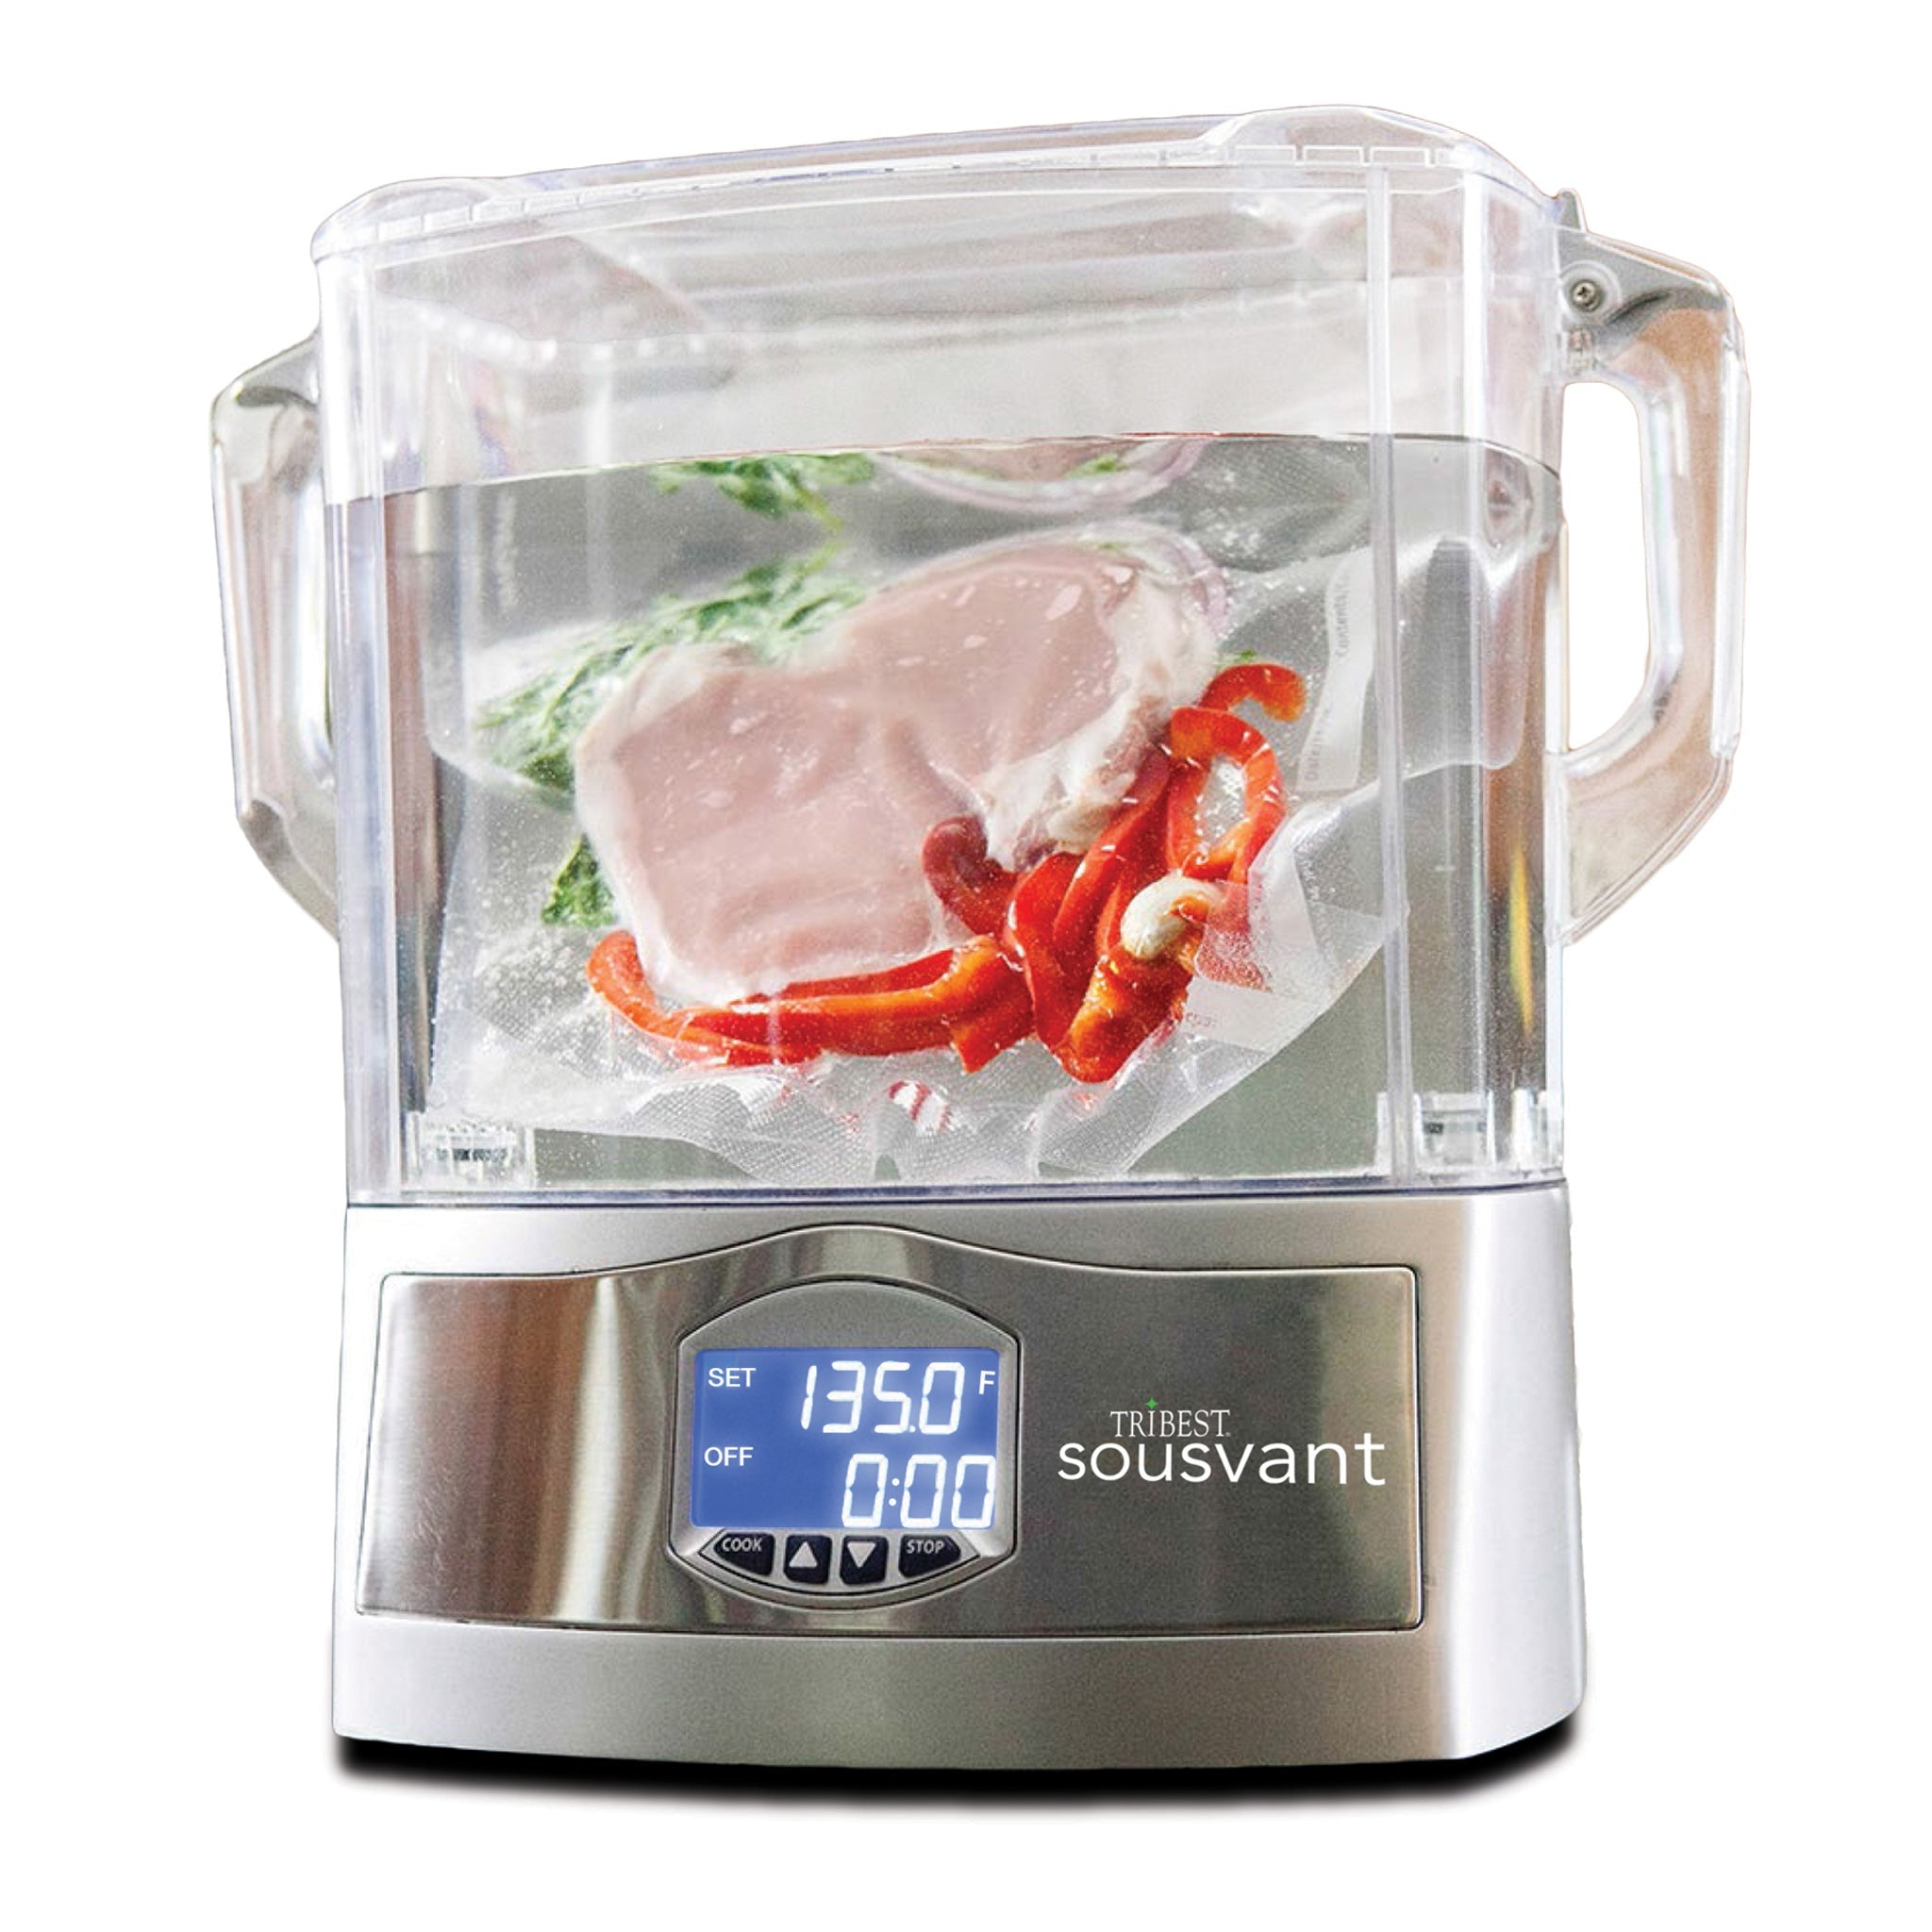 Sousvant Sous Vide Circulator SV-101 with Meat and Red Bell Peppers - Tribest